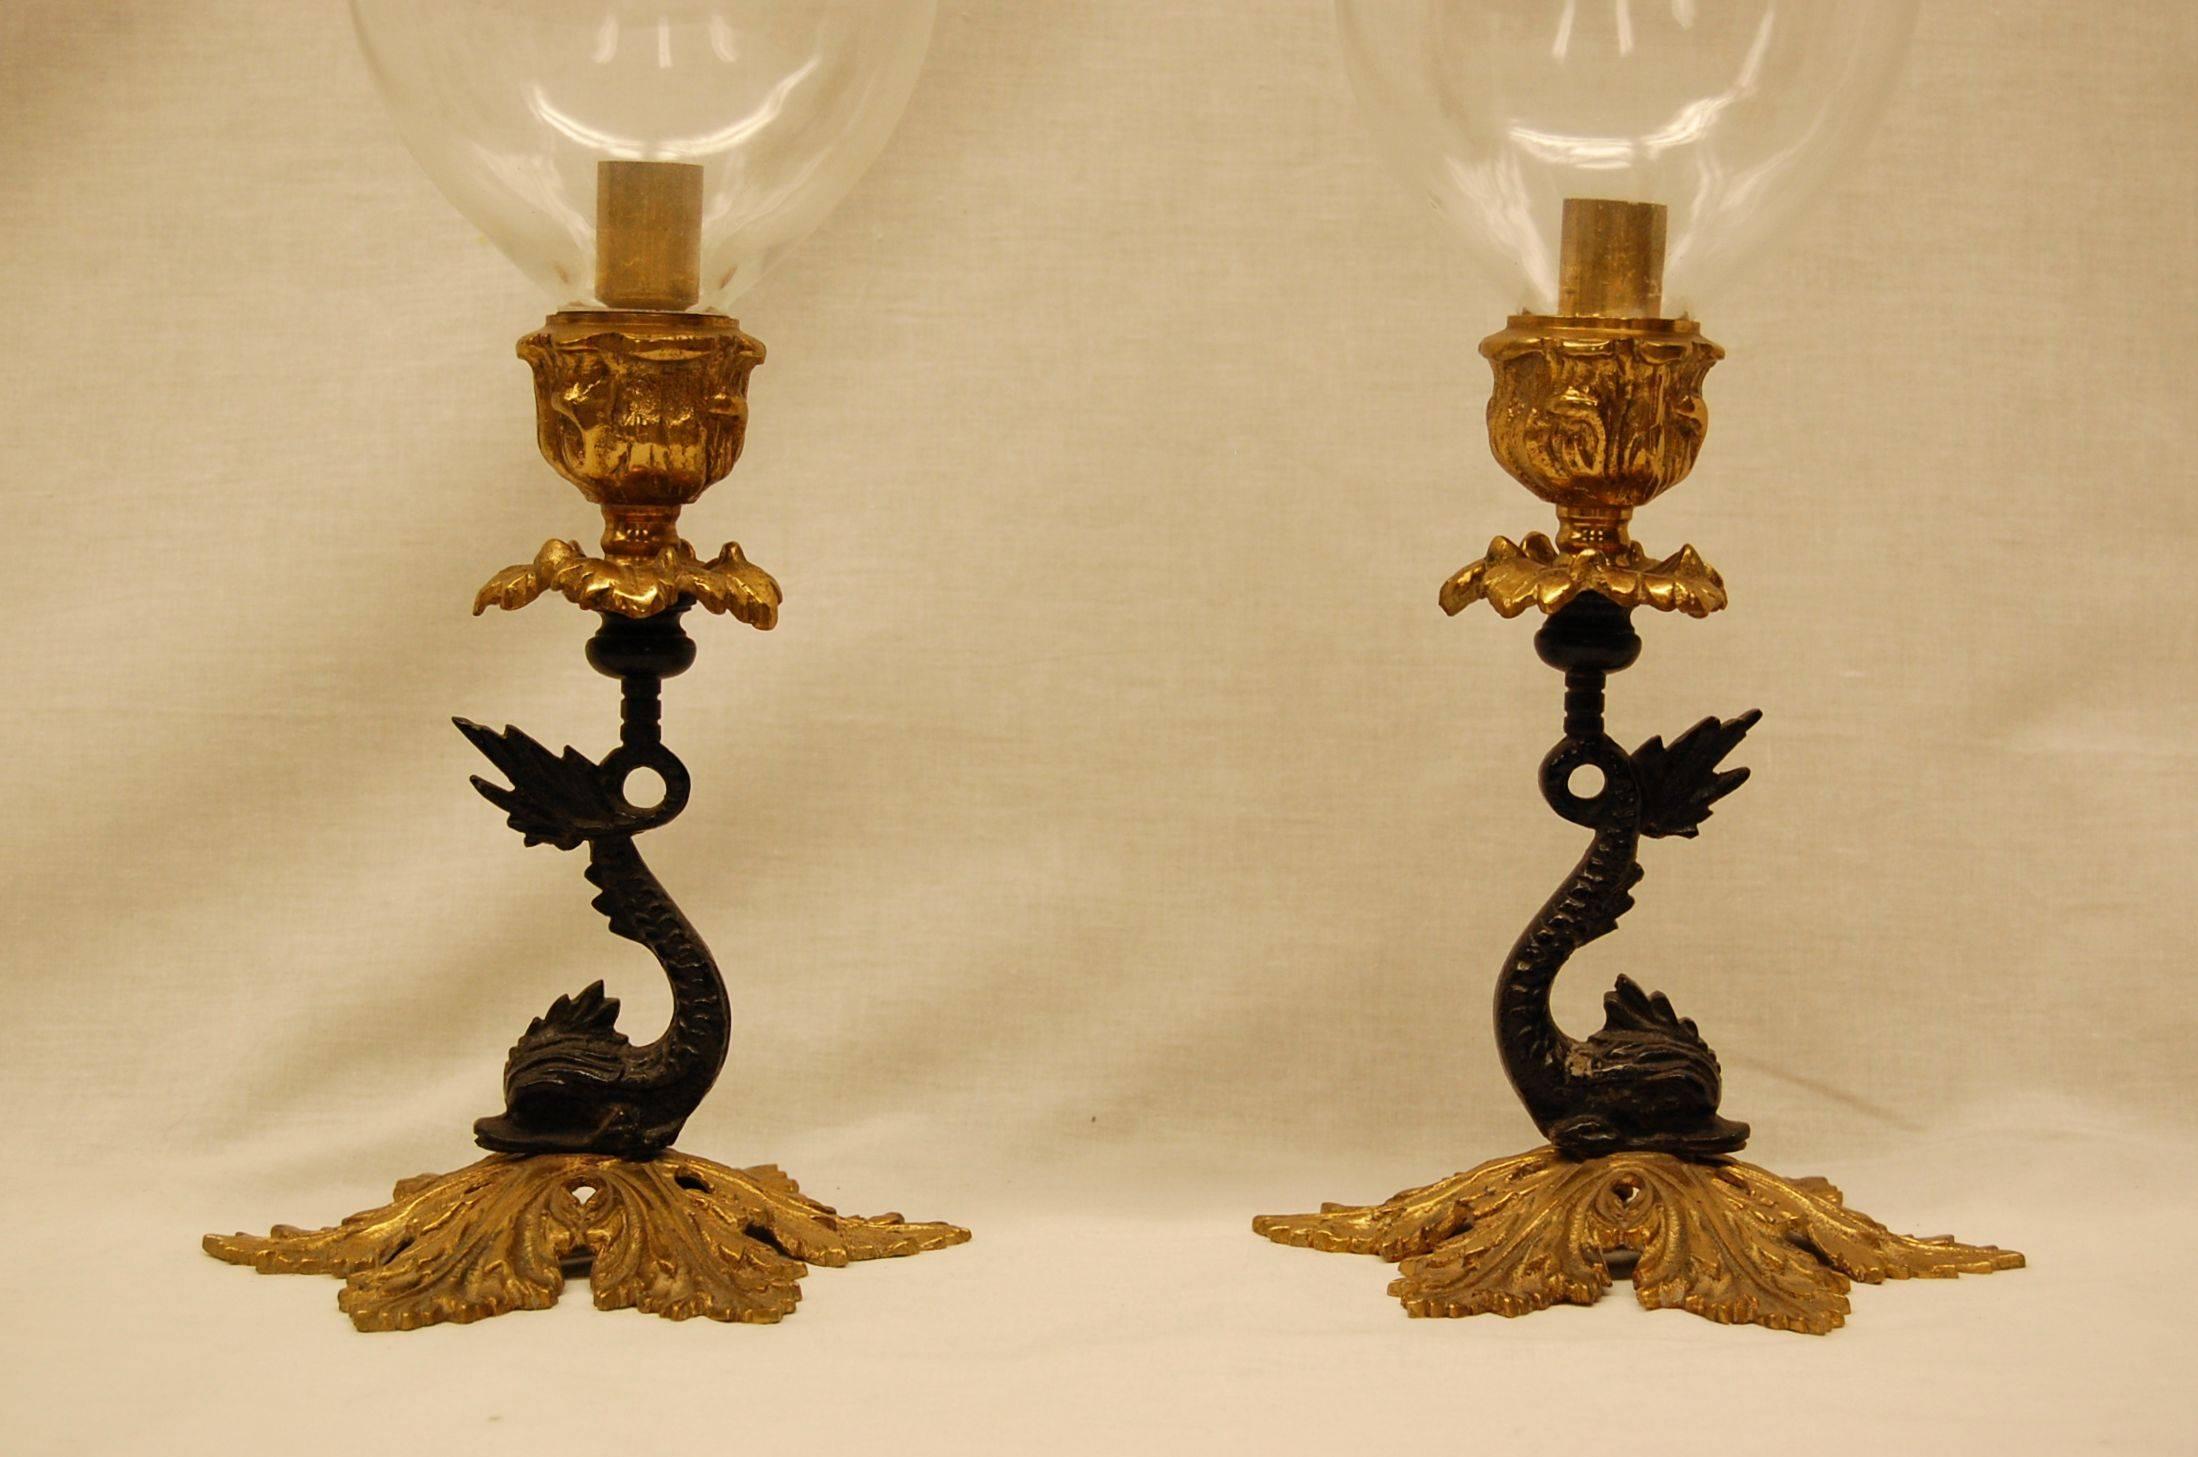 Pair of candlesticks with large heavy glass hurricanes on brass bases with dolphin form stems in black paint.